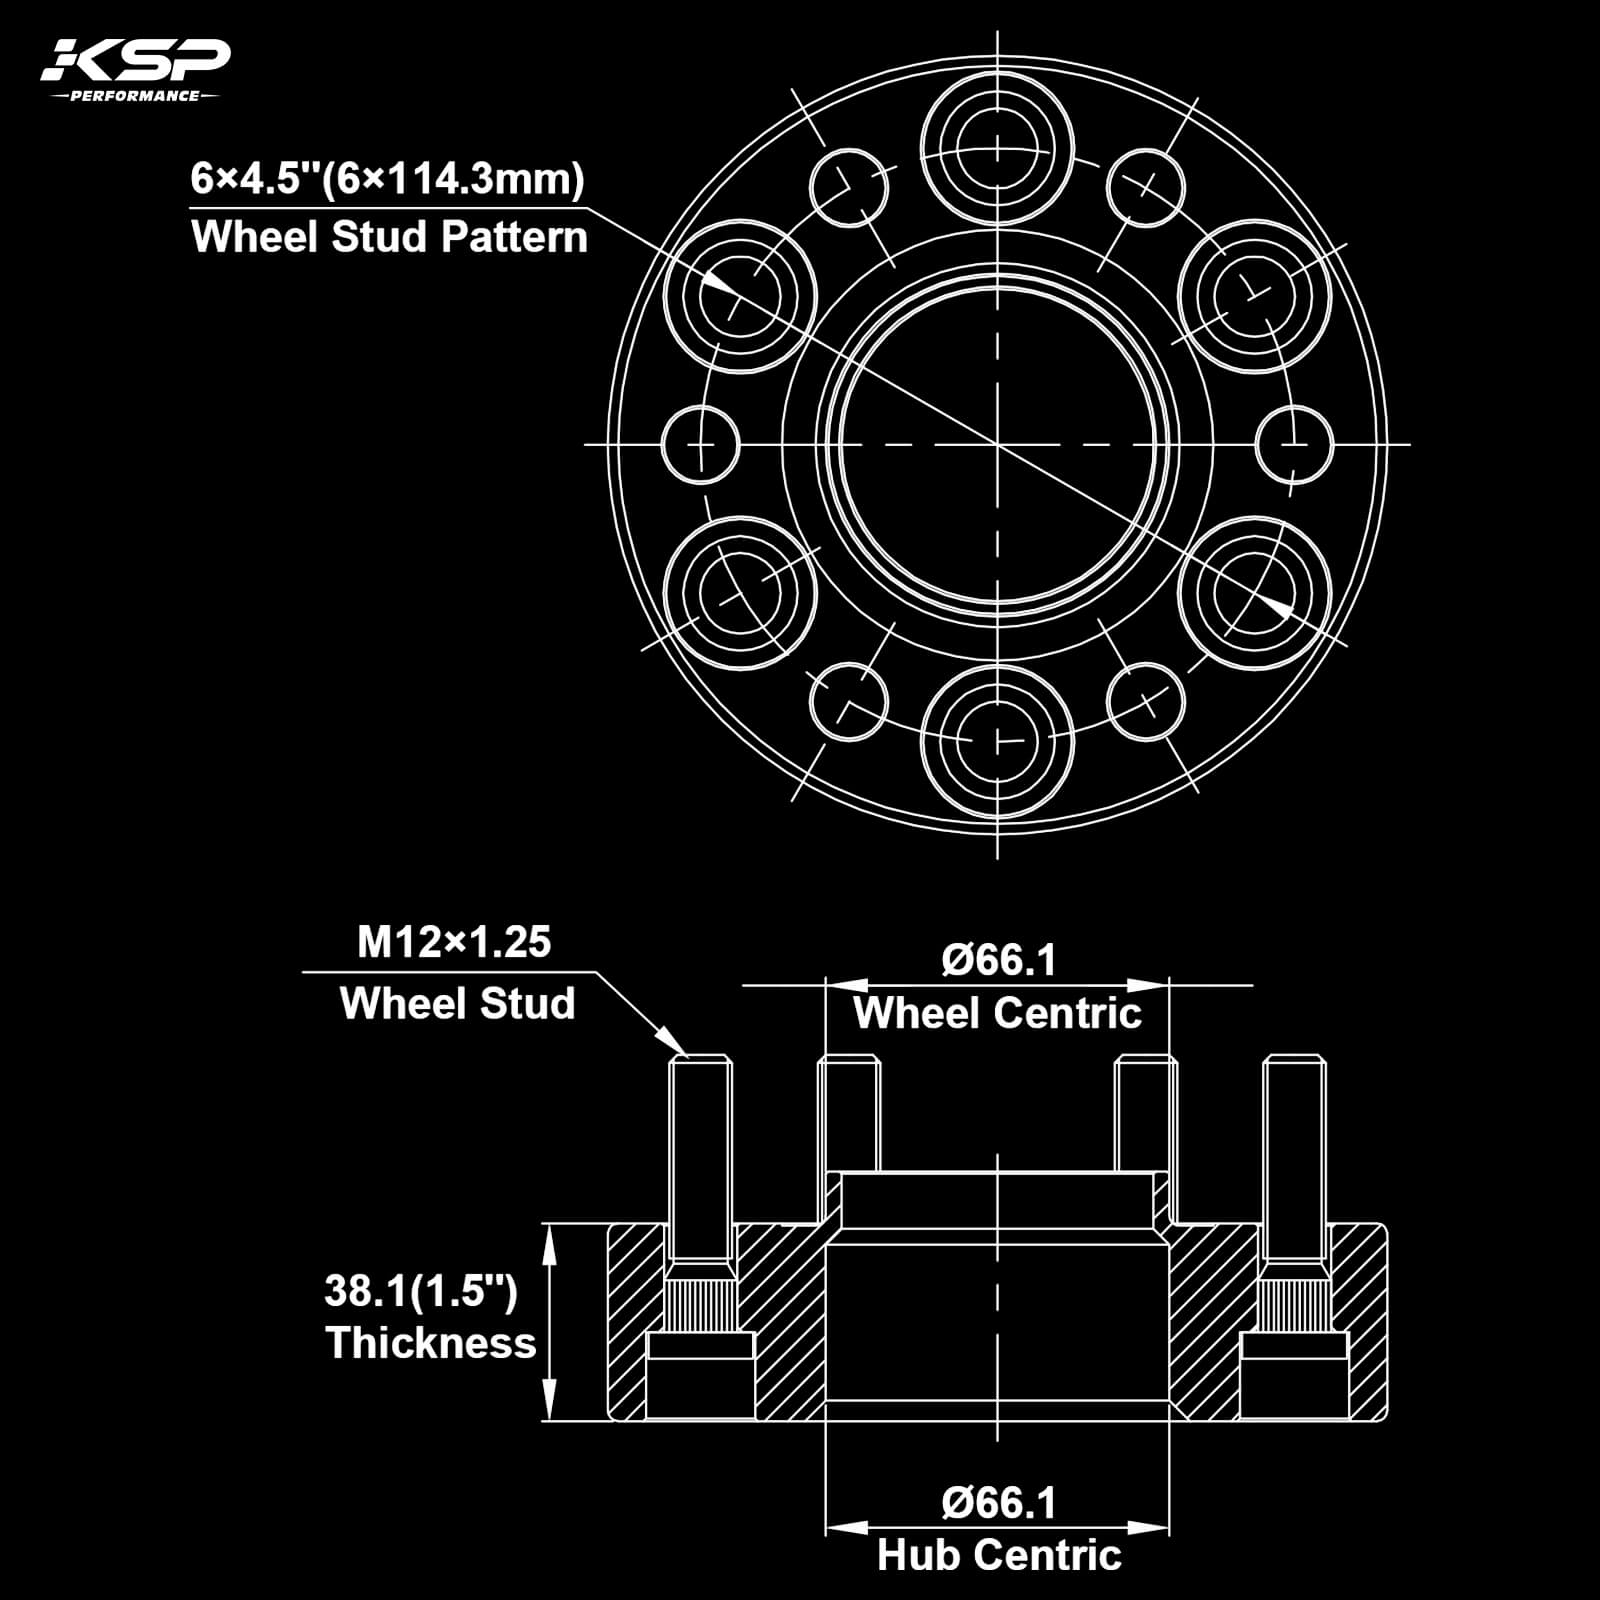 1.5" 6×4.5 Hubcentric Wheel Spacers For Nissan Frontier Pathfinder Xterra - KSP performance 